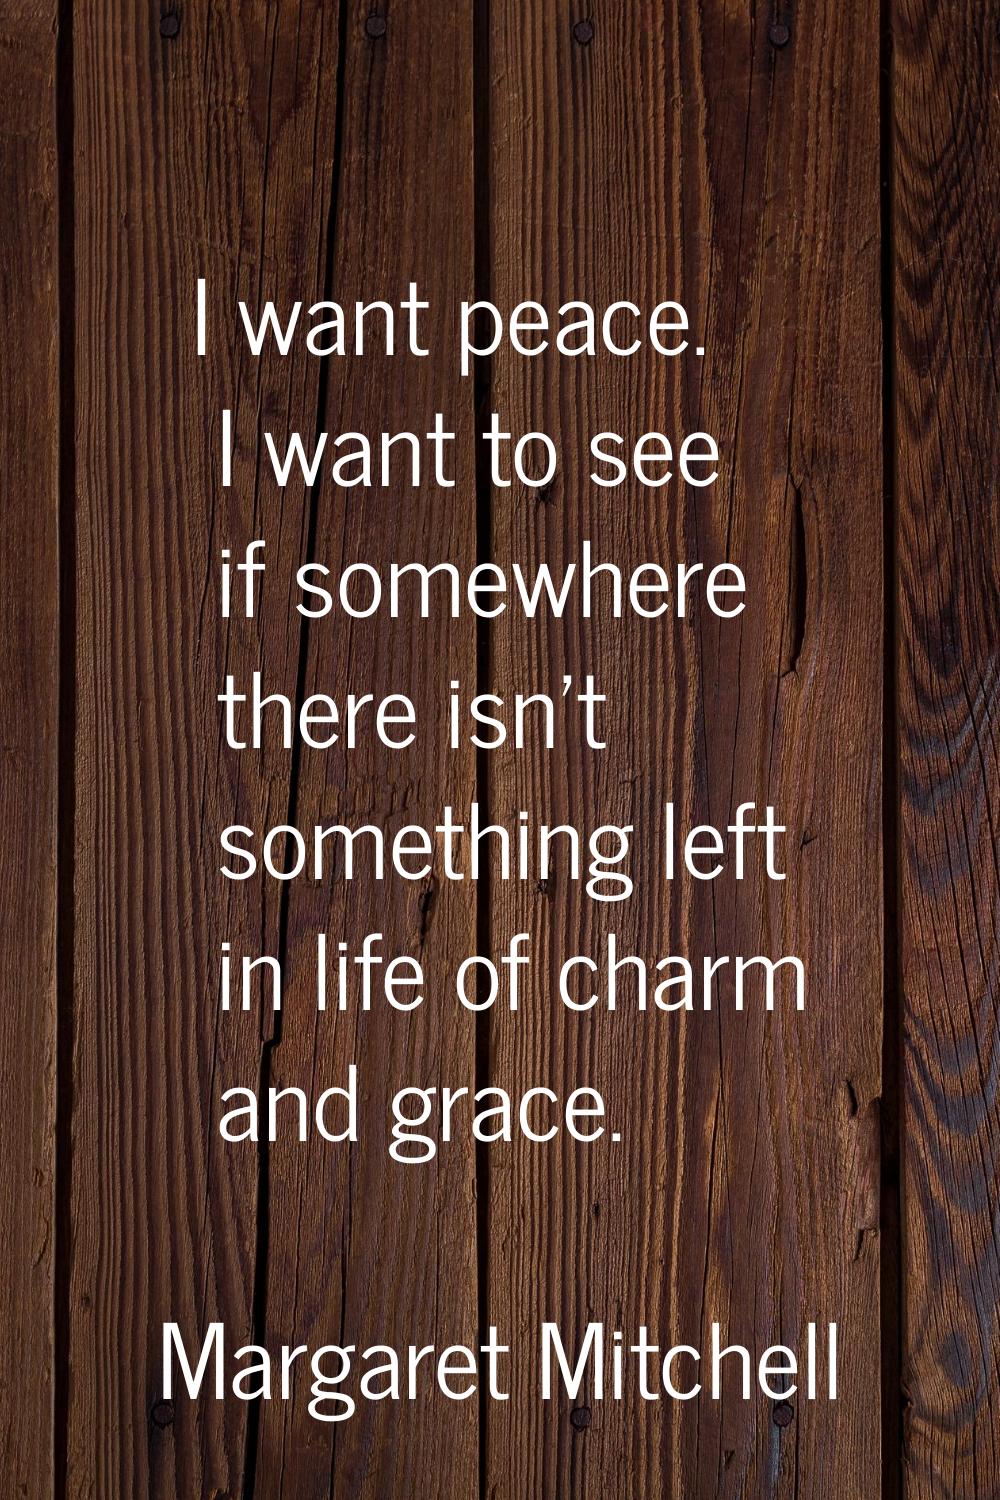 I want peace. I want to see if somewhere there isn't something left in life of charm and grace.